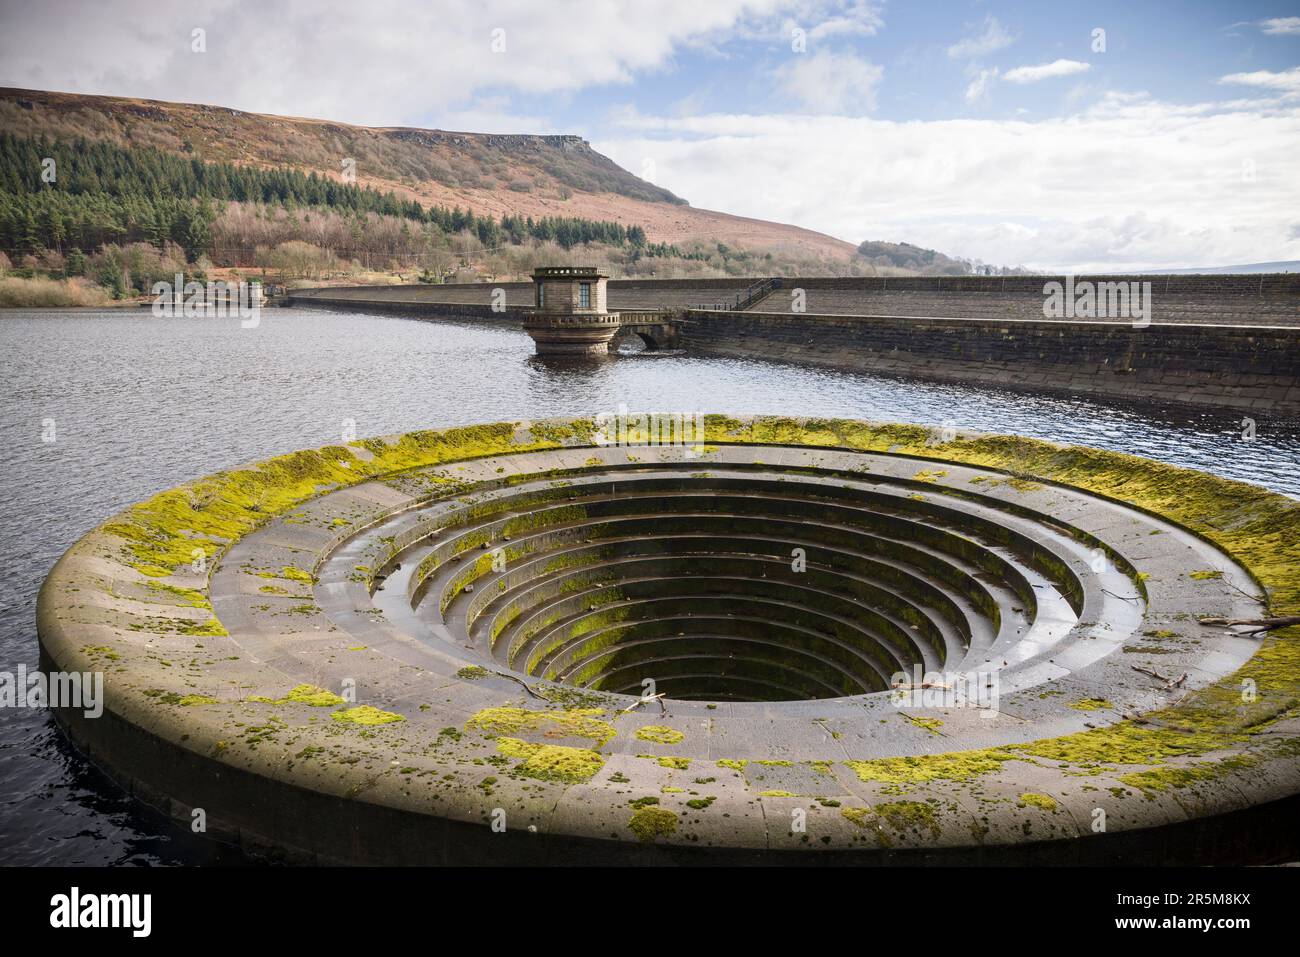 Ladybower reservoir dam wall and bellmouth spillway in winter, Peak District, UK Stock Photo